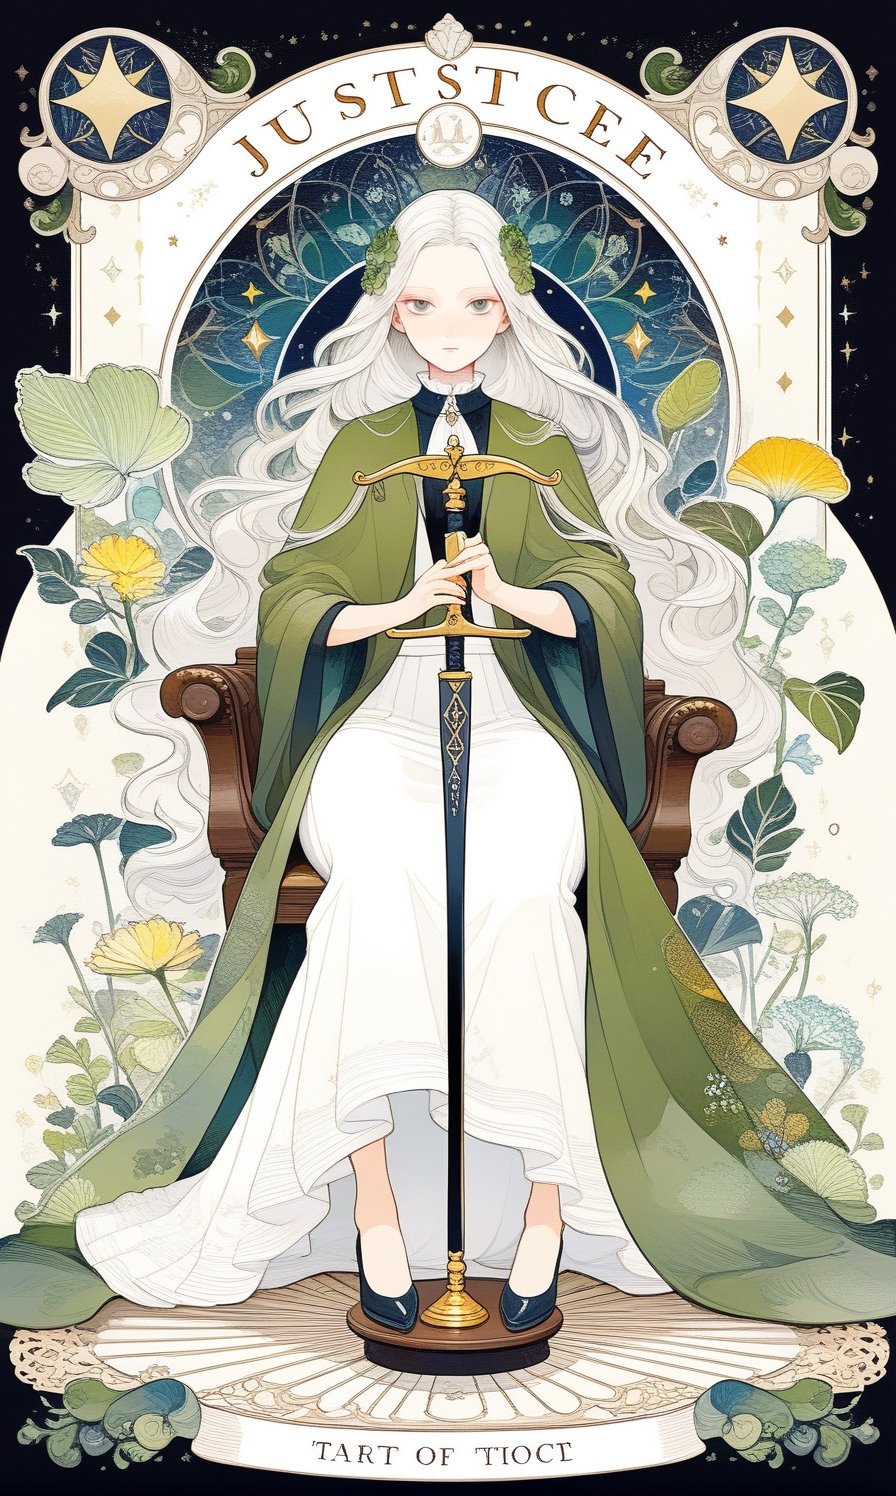 1 woman, platinum long hair, (holding a Balance scales), a sword at feet side, green cloak, white long skirt, sitting in the judgment seat, court, muscles, full body, fractal art, (tarot card design), botanical illustration, classic, elegant flourishes, lofi art style, retro, [(text that says "JUSTICE" at bottom)], best quality, masterpiece, extremely detailed, intricate details,  